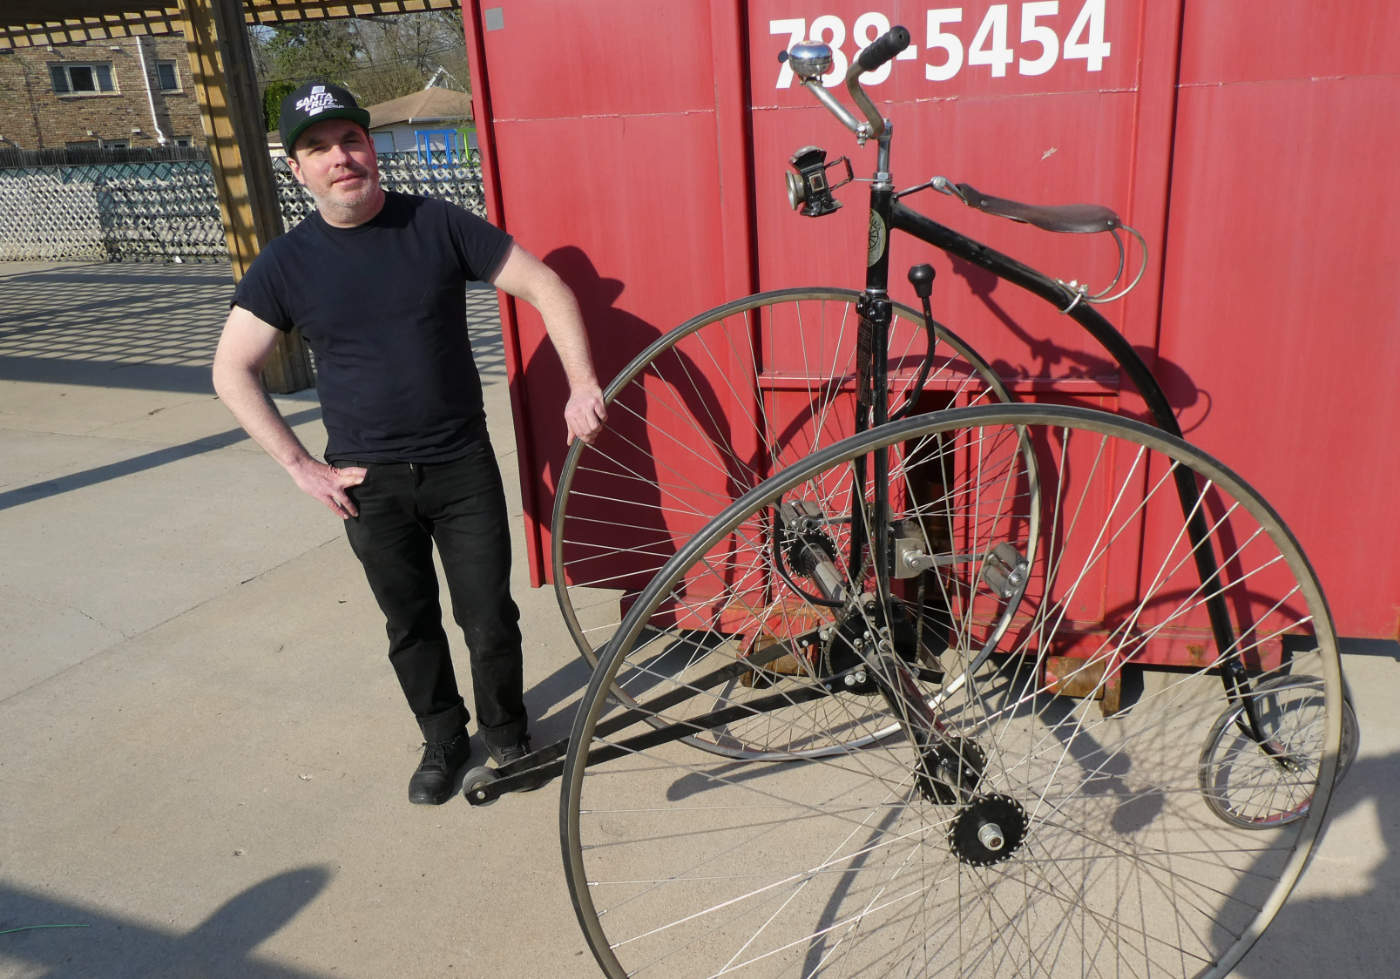 man dressed in black pants Tshirt and baseball cap standing next to a classic tall two-wheeled bicycle in front of a large red metal container box